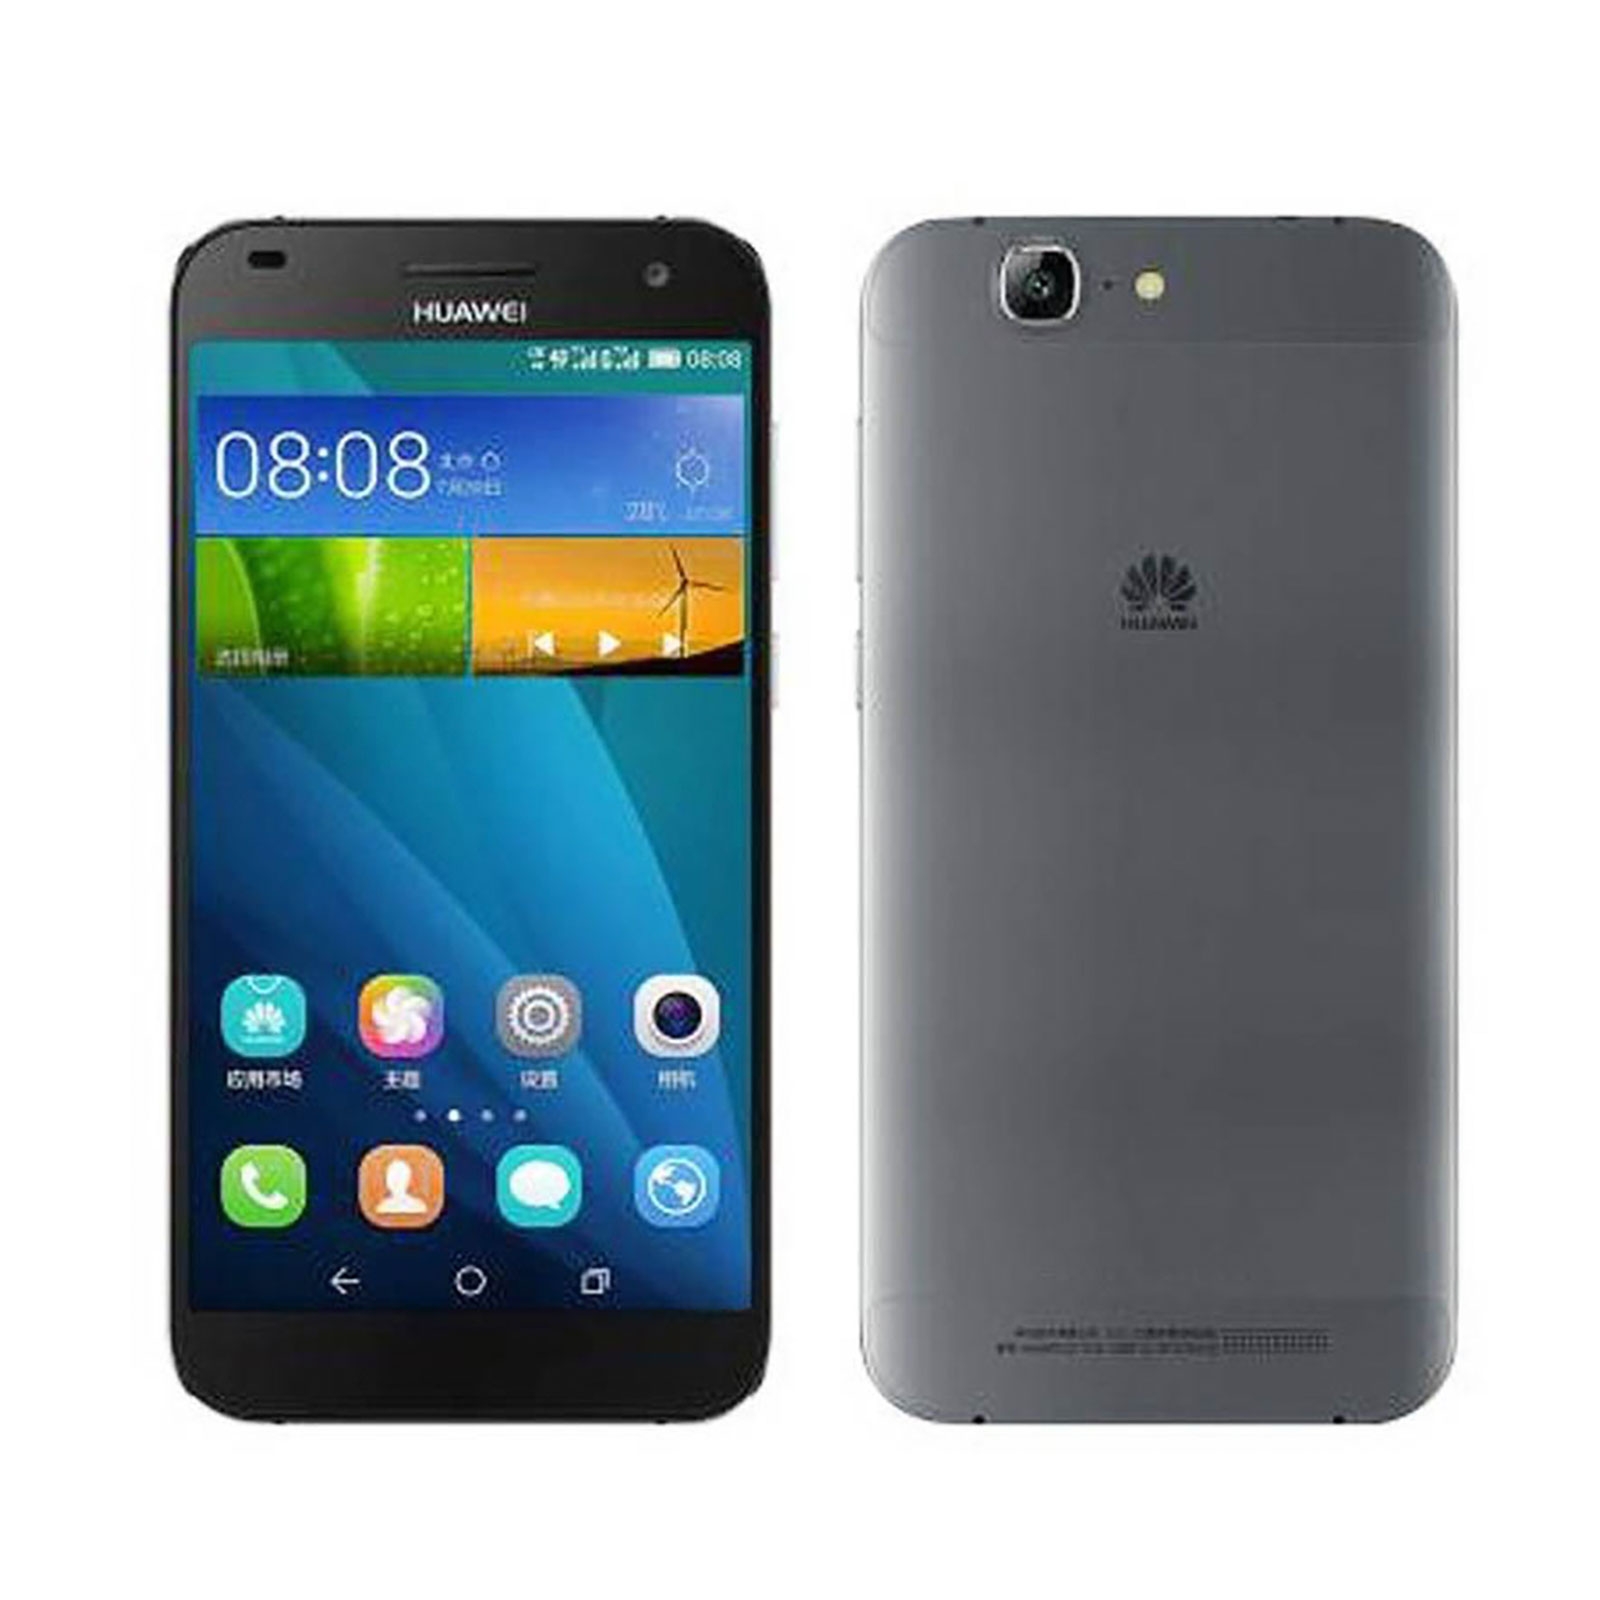 HUAWEI_G7_Firmware_G7-L01_Android 6.0.1_FIRMWARE